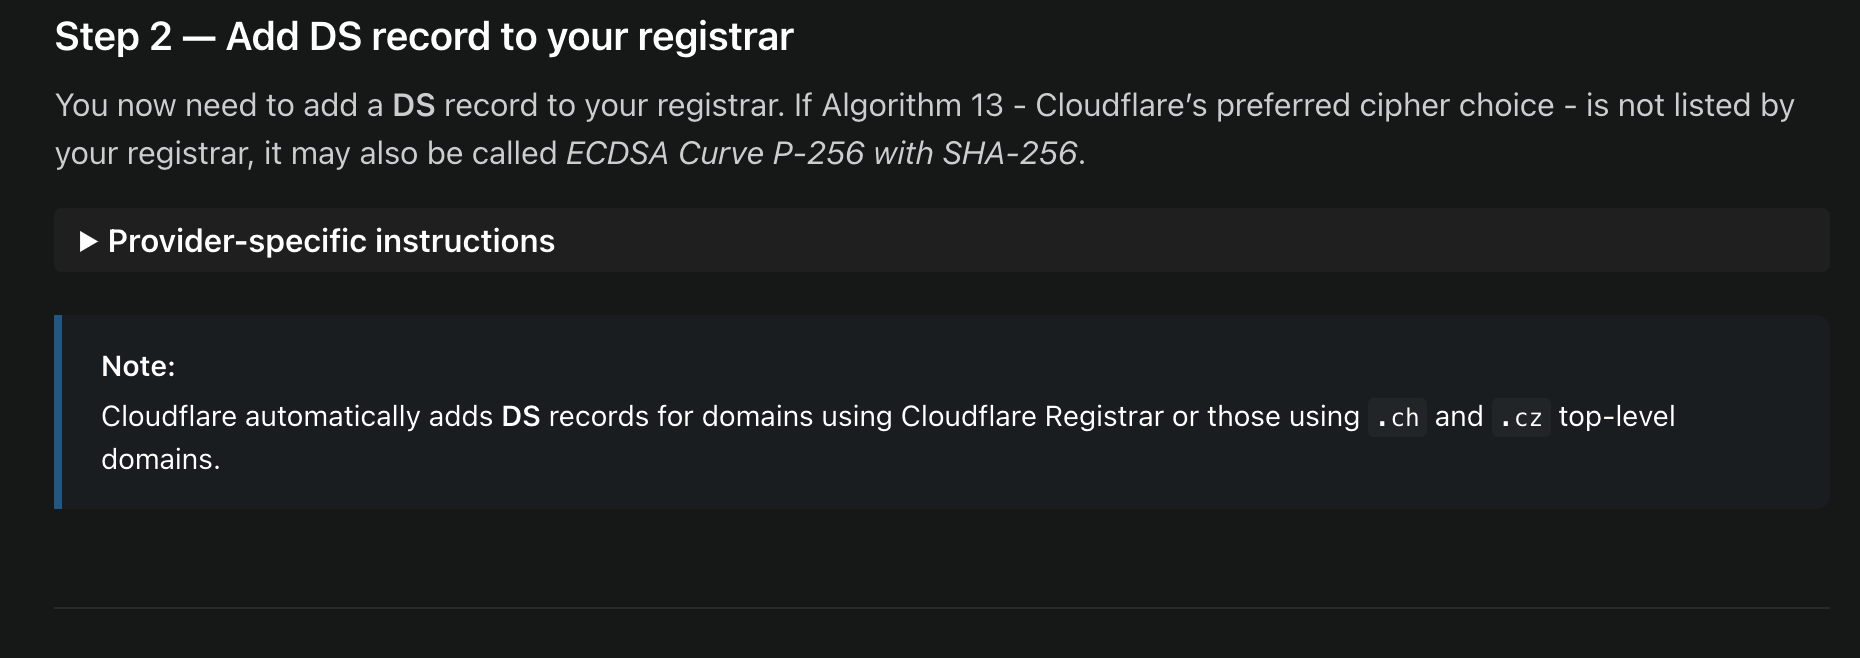 https://developers.cloudflare.com/dns/additional-options/dnssec